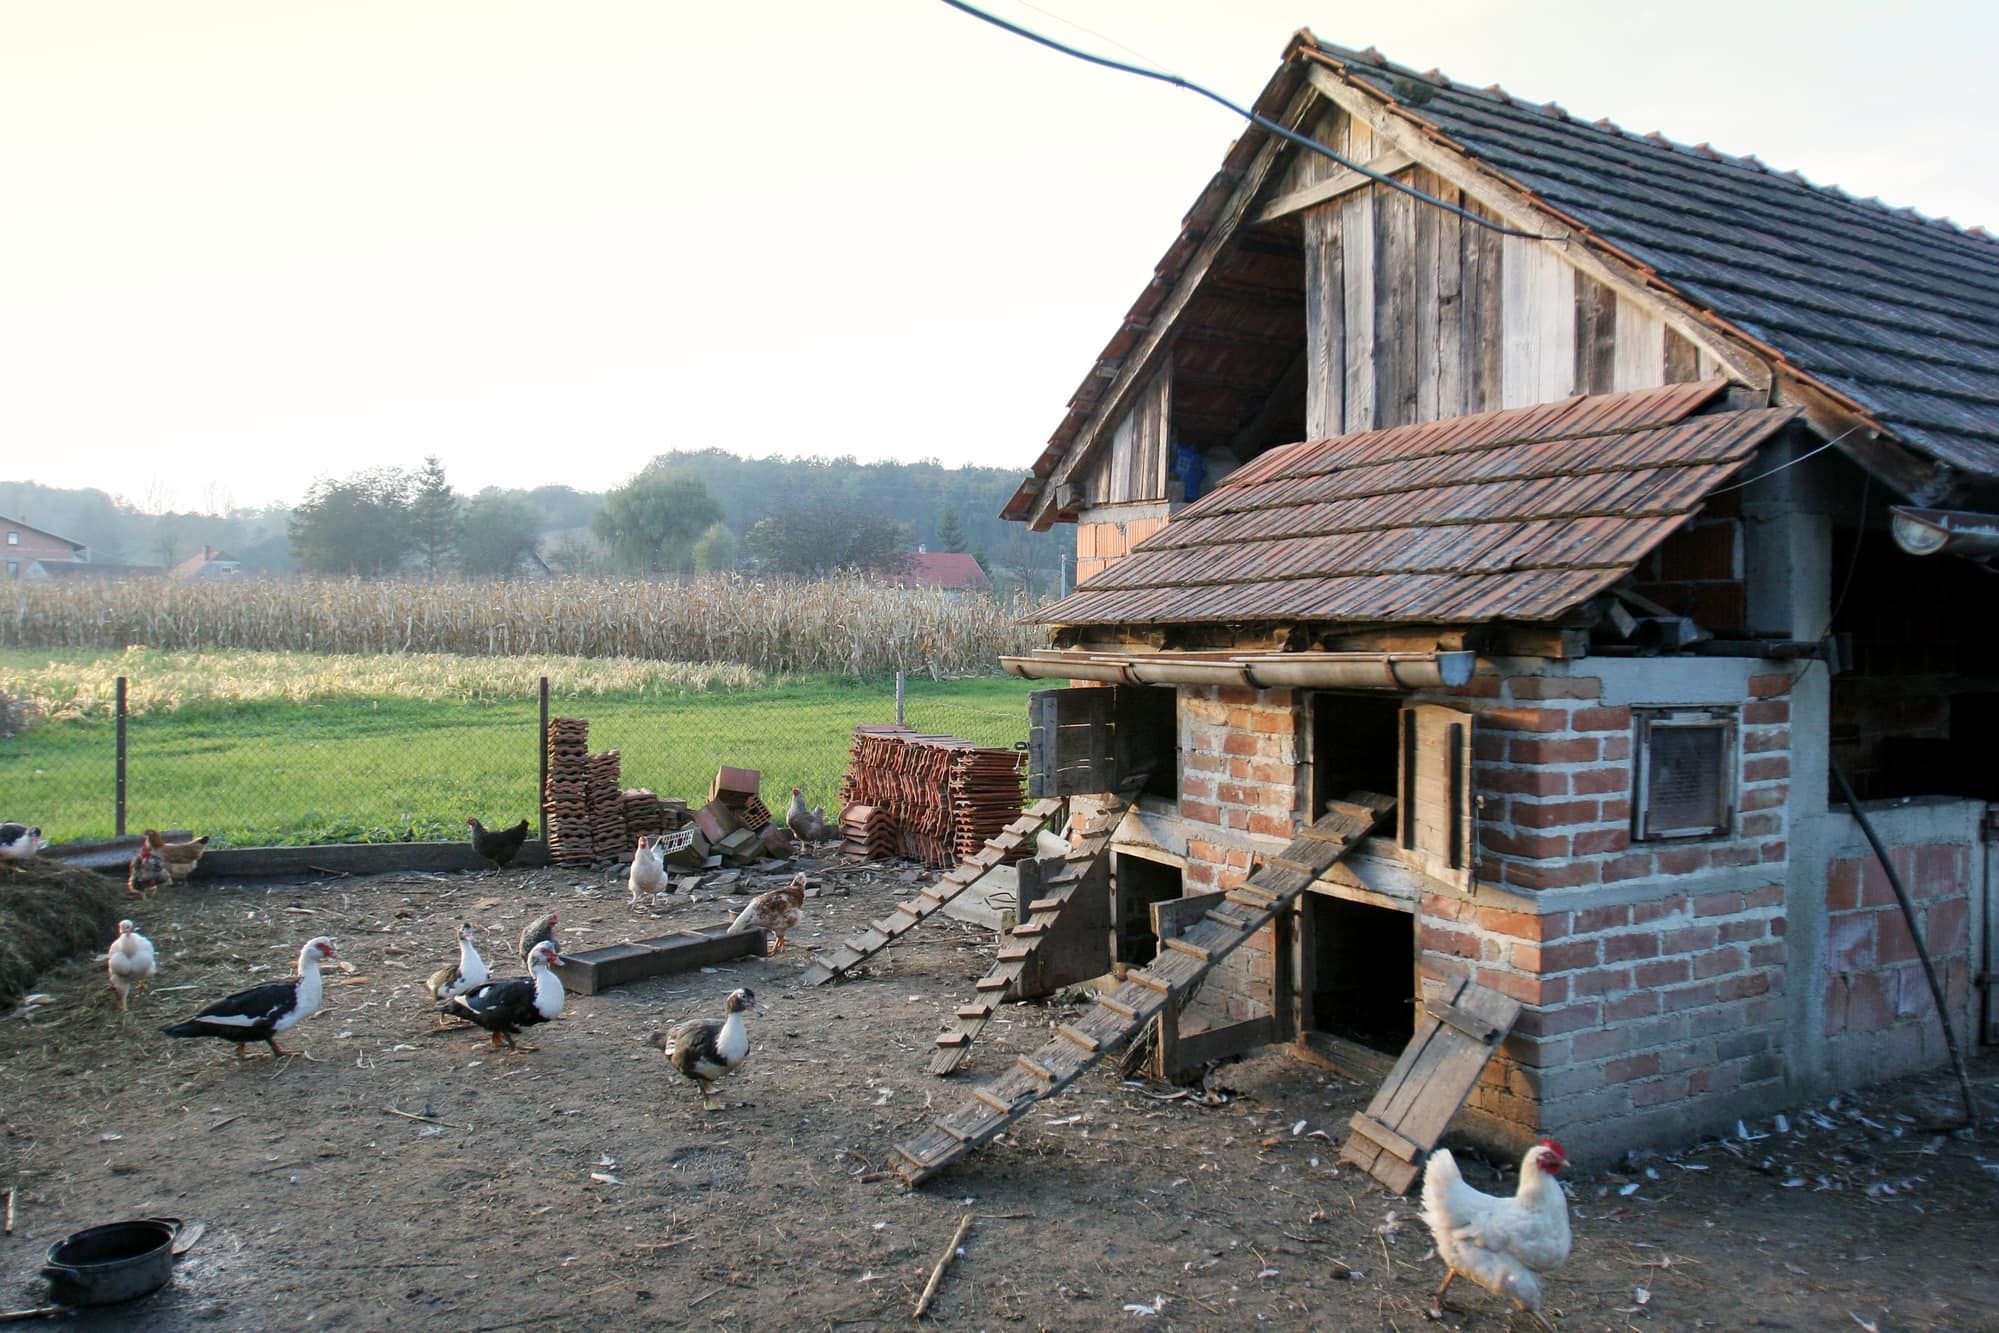 A group of hens, roosters and ducks walking in the yard in front of a hen house.